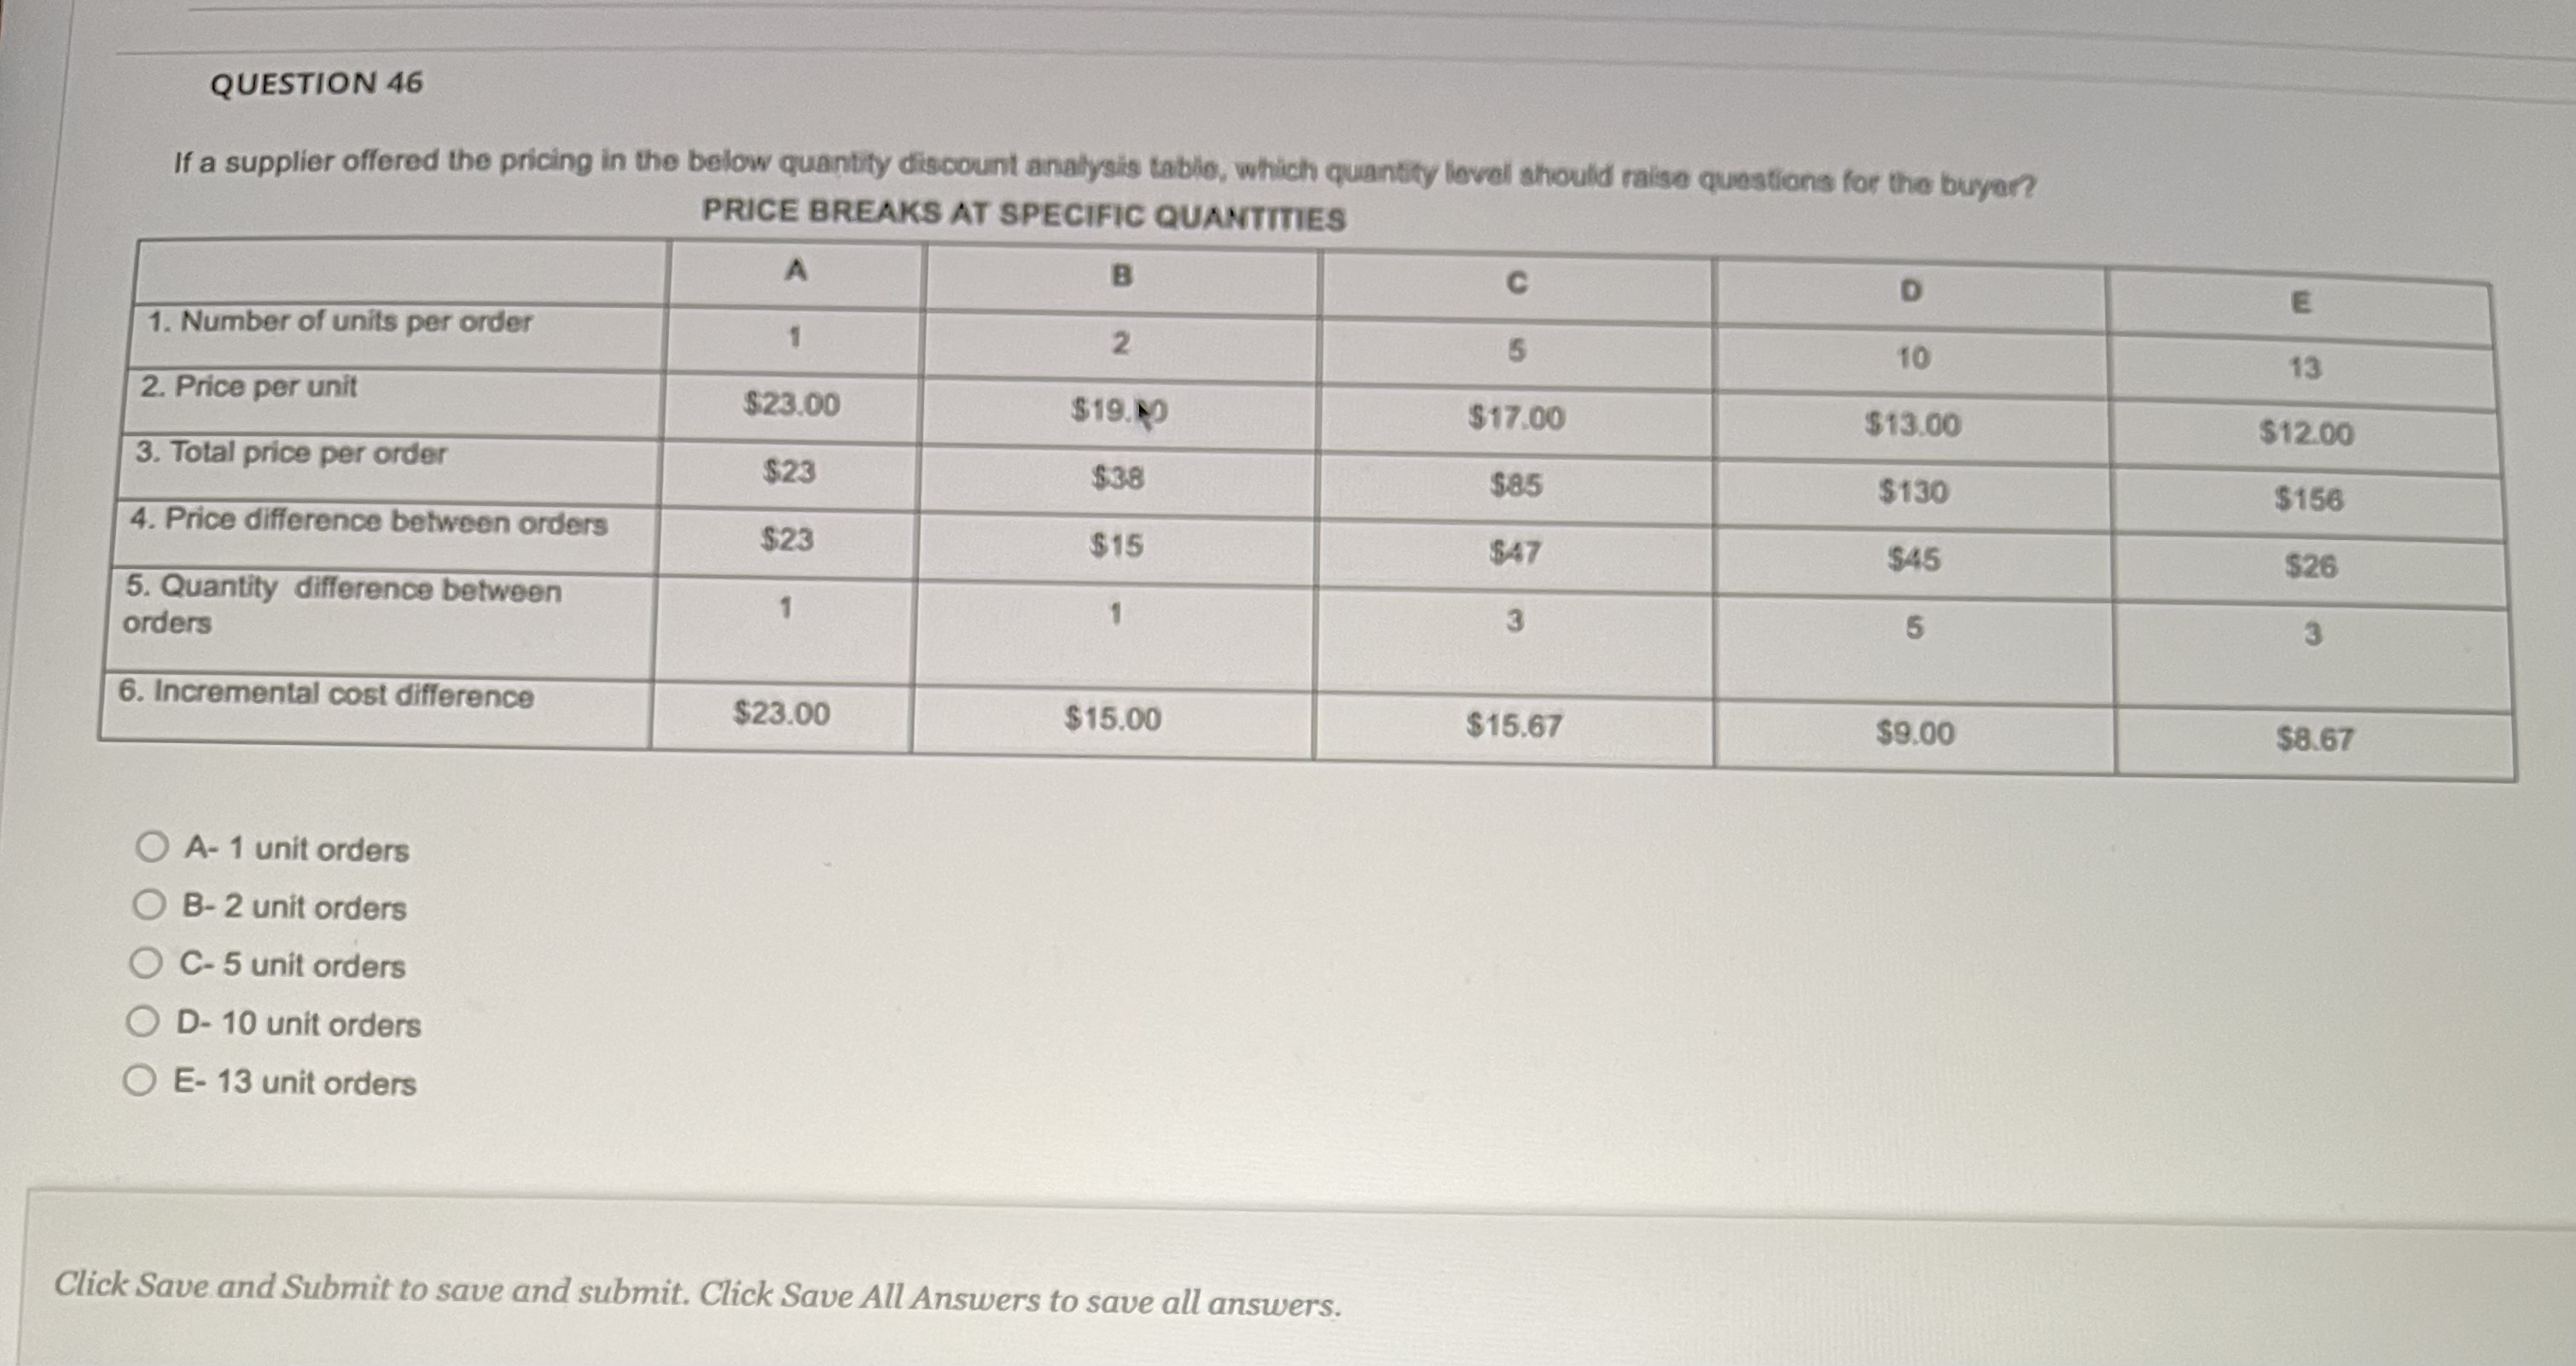 QUESTION 46 If a supplier offered the pricing in the below quantity discount analysis table, which quantity